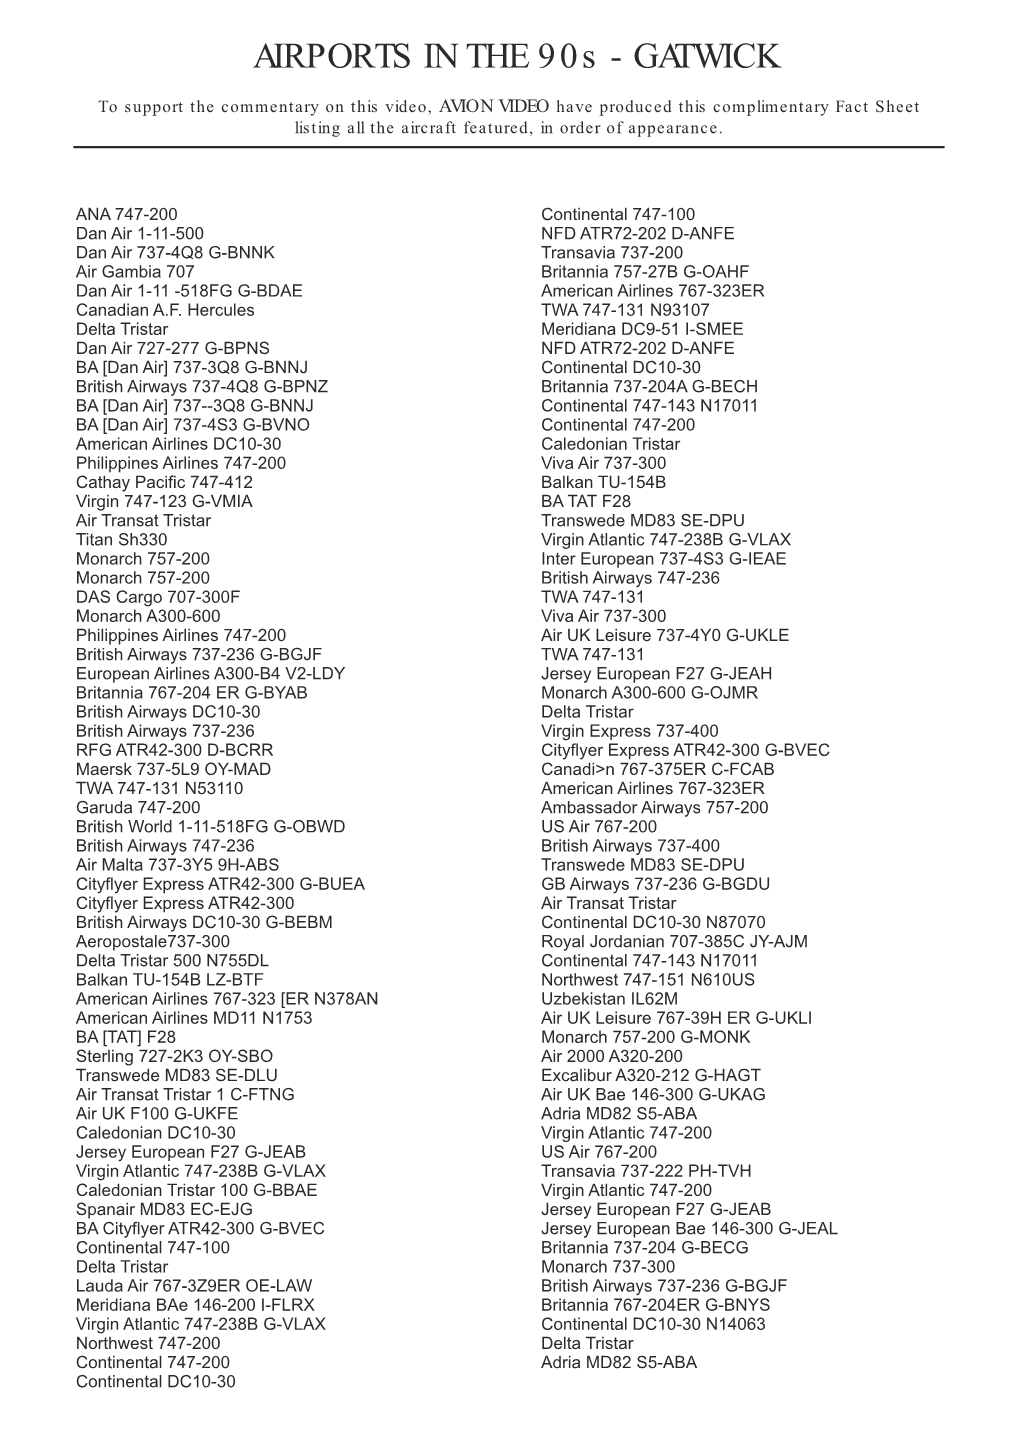 Fact Sheet Listing All the Aircraft Featured, in Order of Appearance